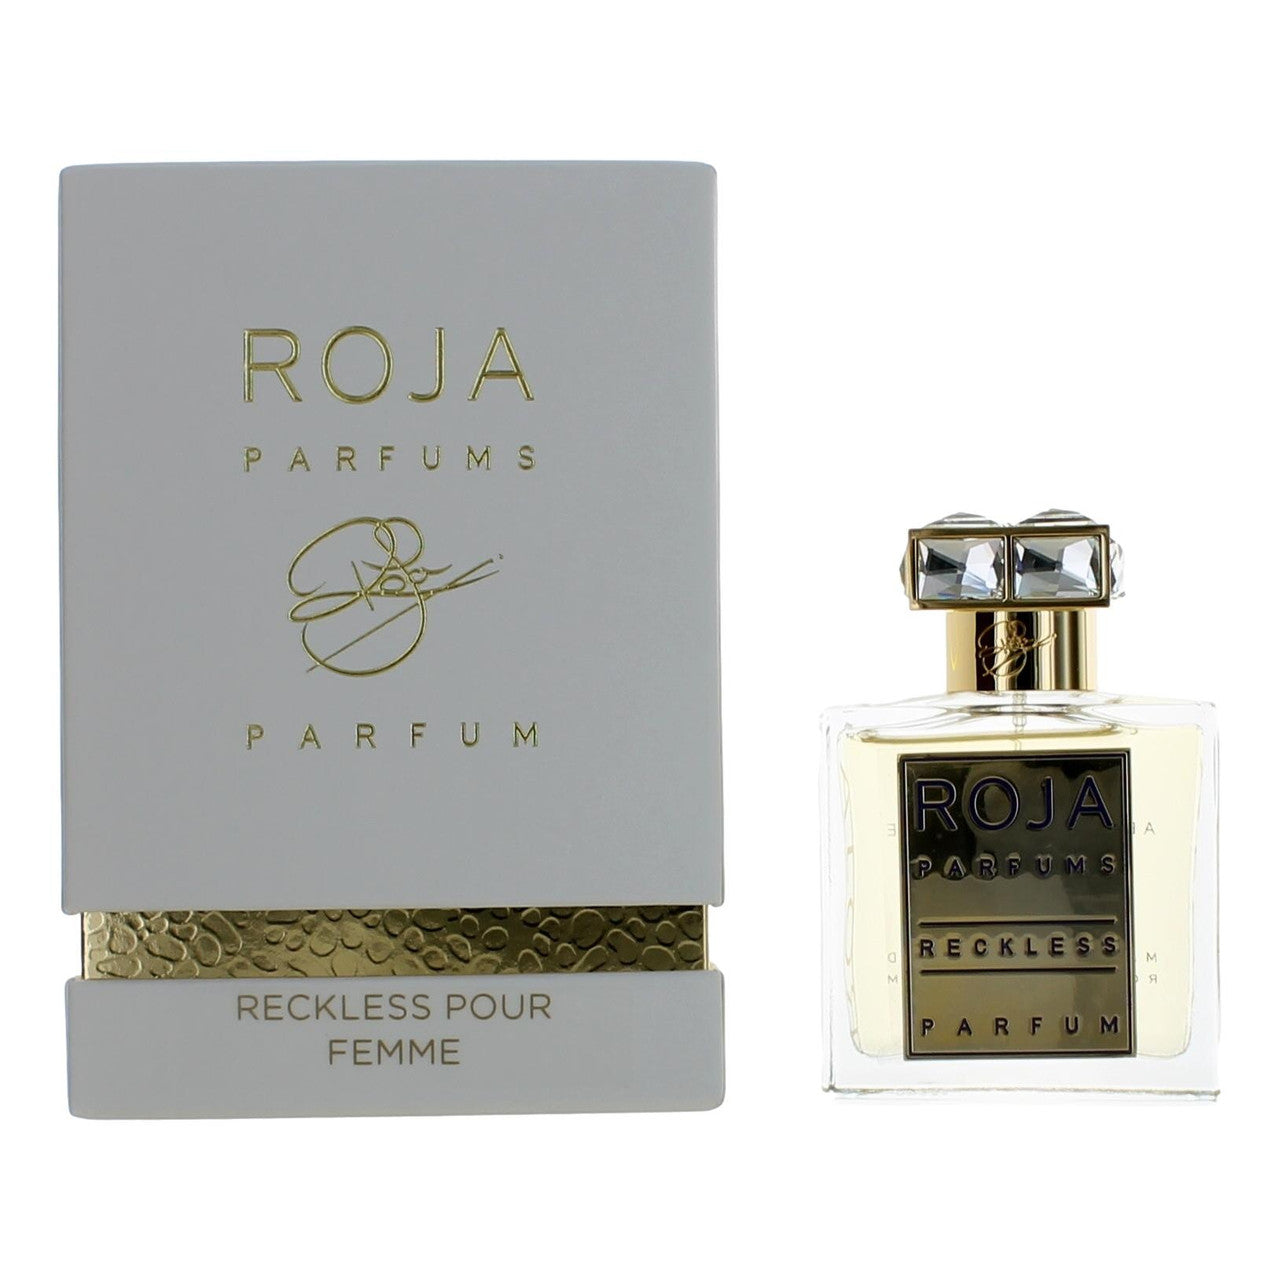 1.7 oz bottle of Reckless Pour Femme by Roja Parfums